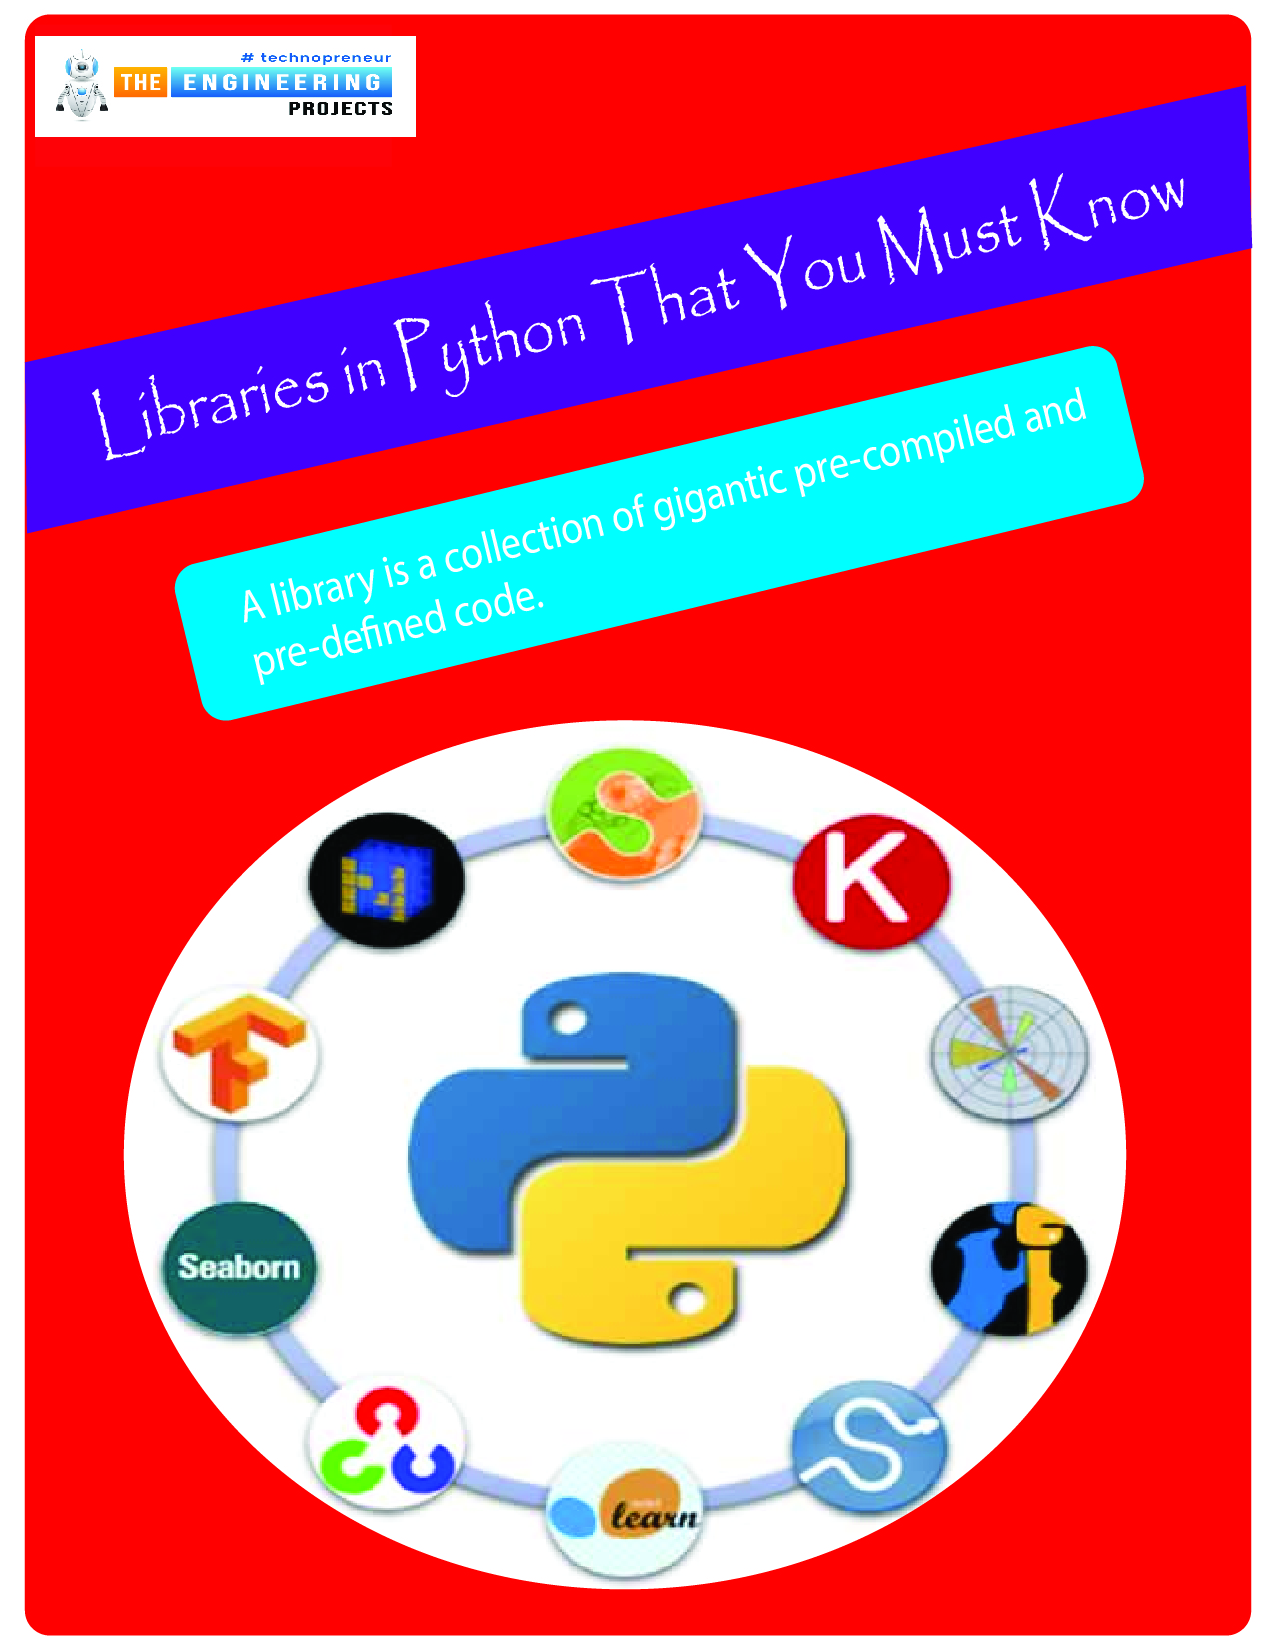 top Libraries in Python, Python top libraries, python libraries, python library, library in python